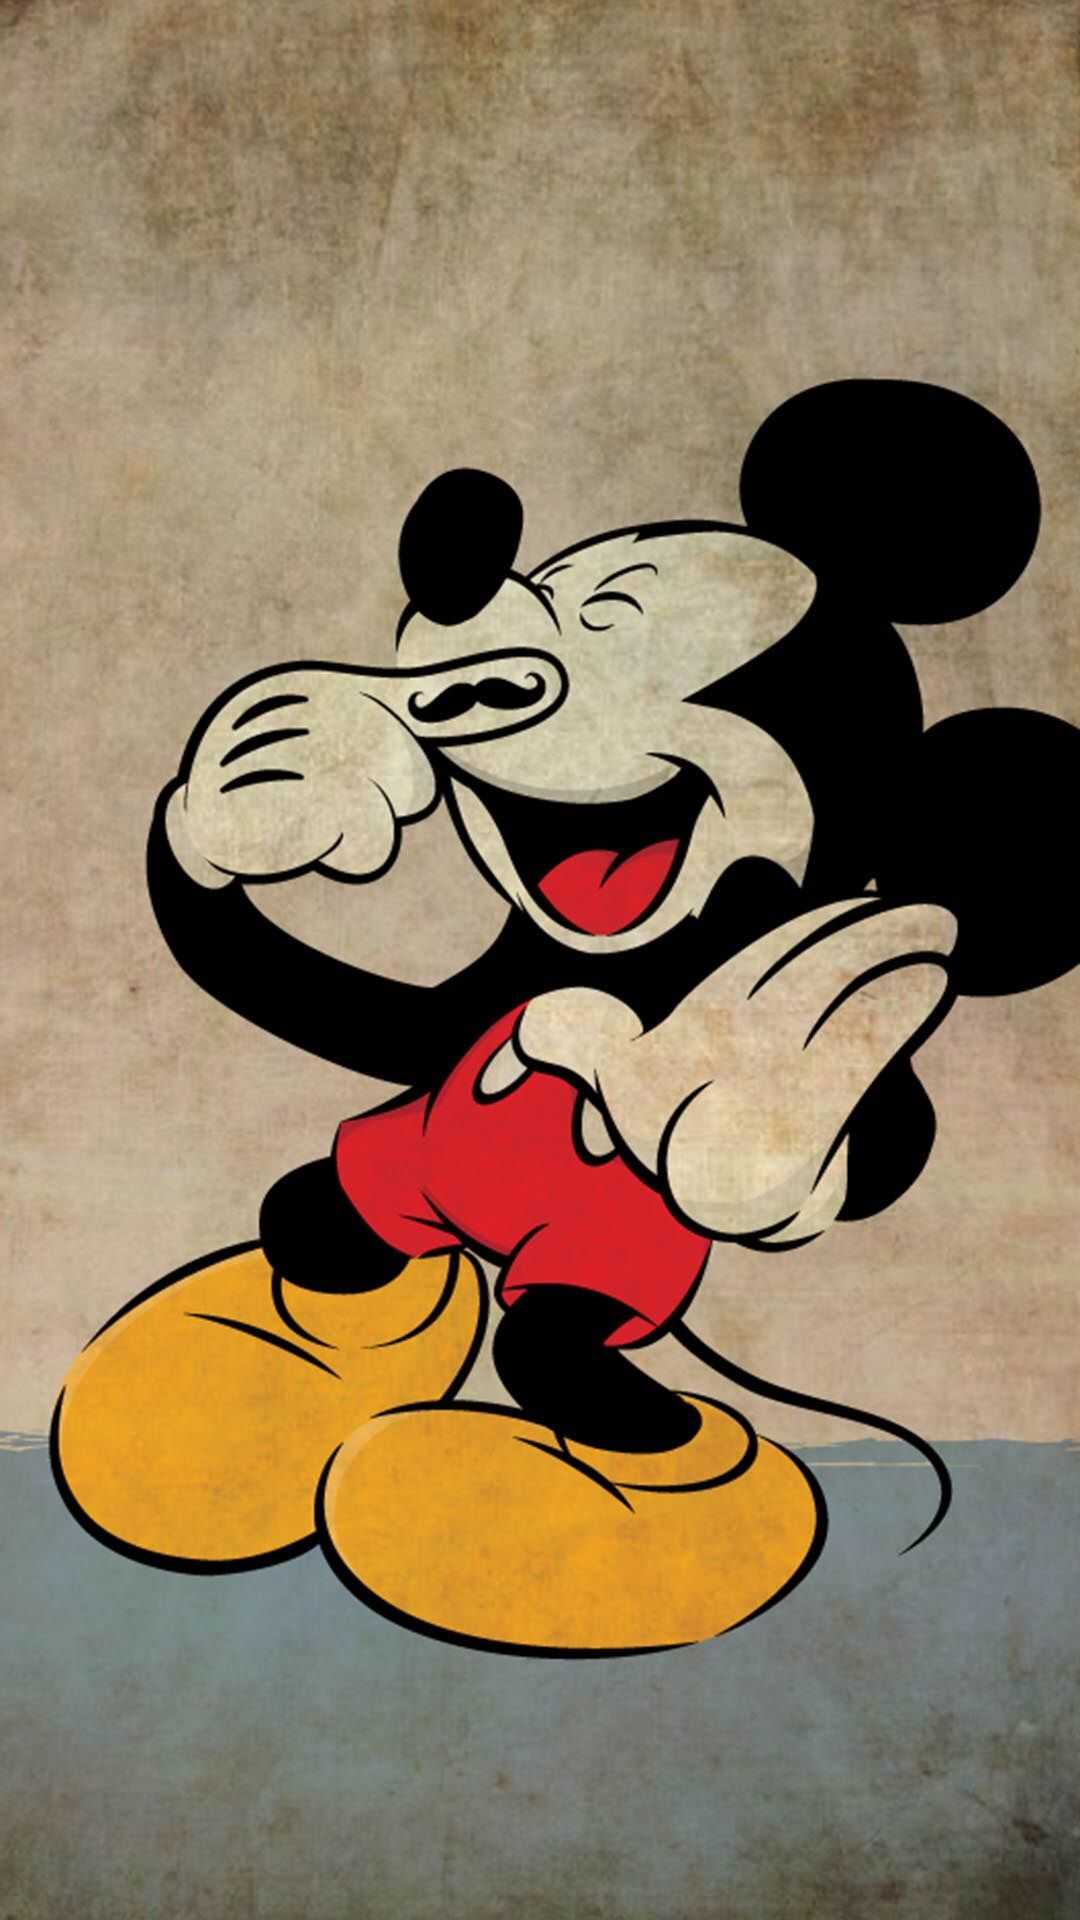 A mickey mouse cartoon character with his mouth open - Mickey Mouse